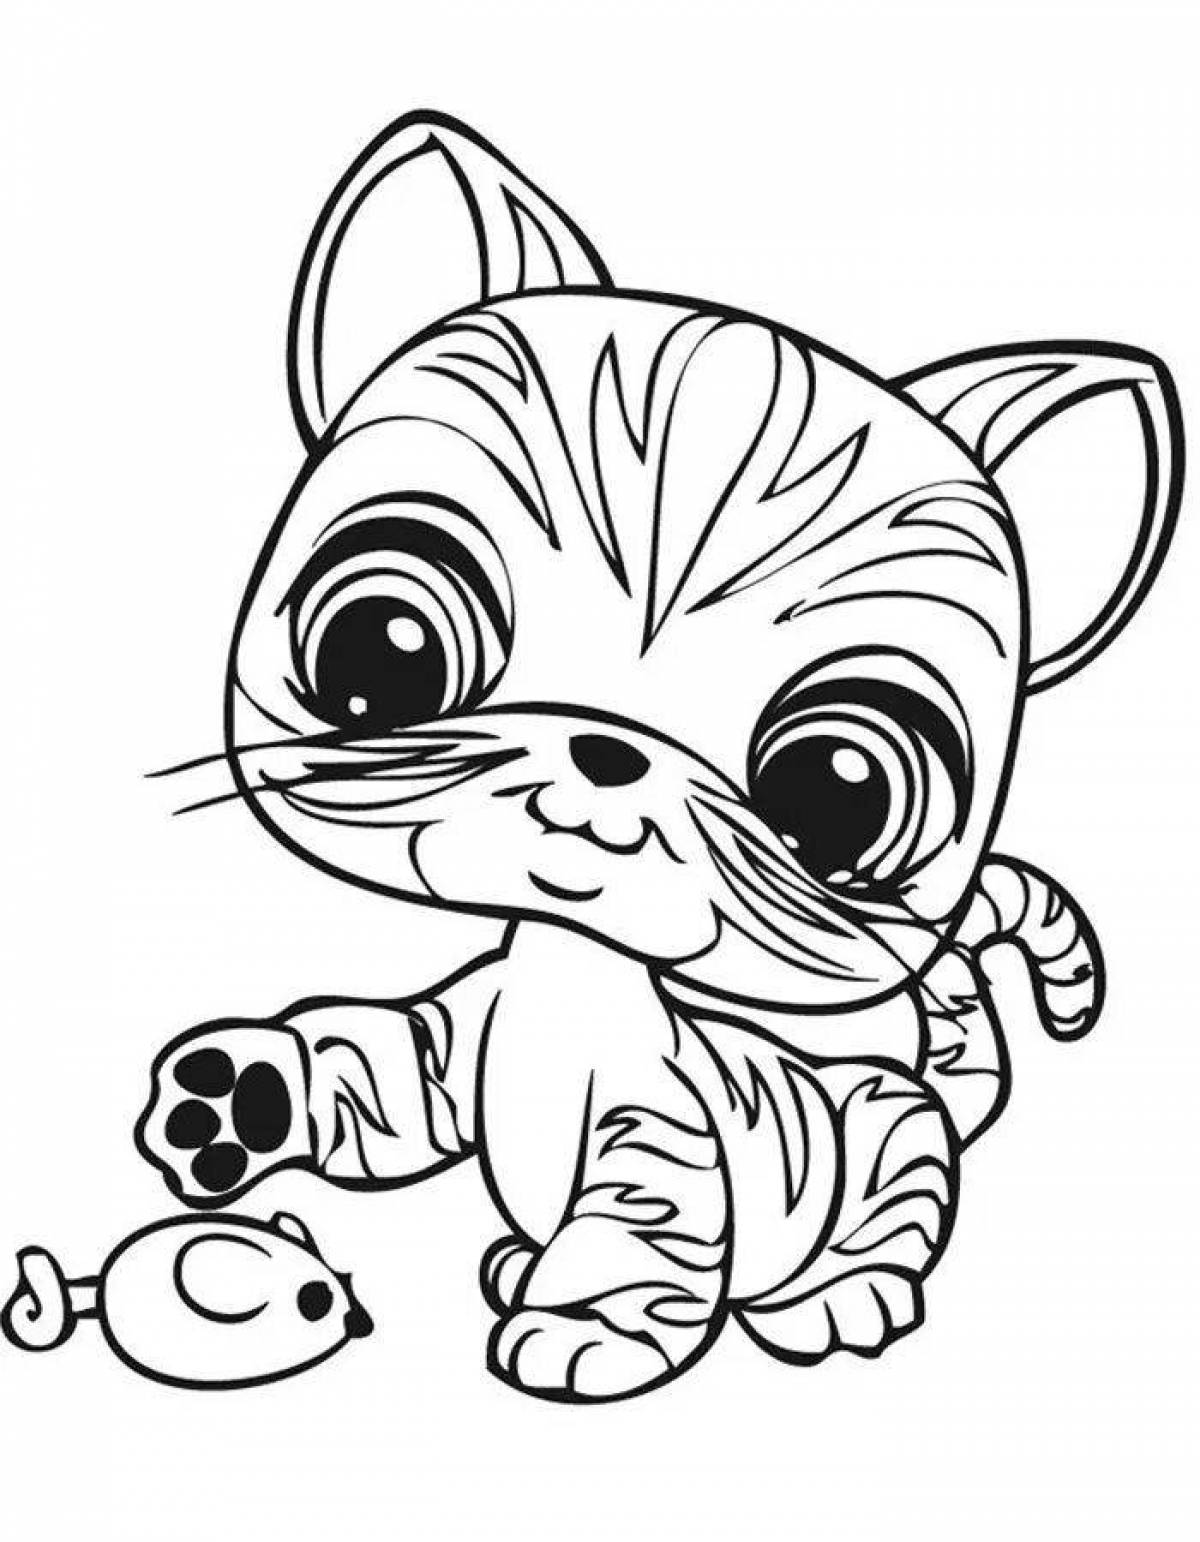 Coloring page adorable kittens